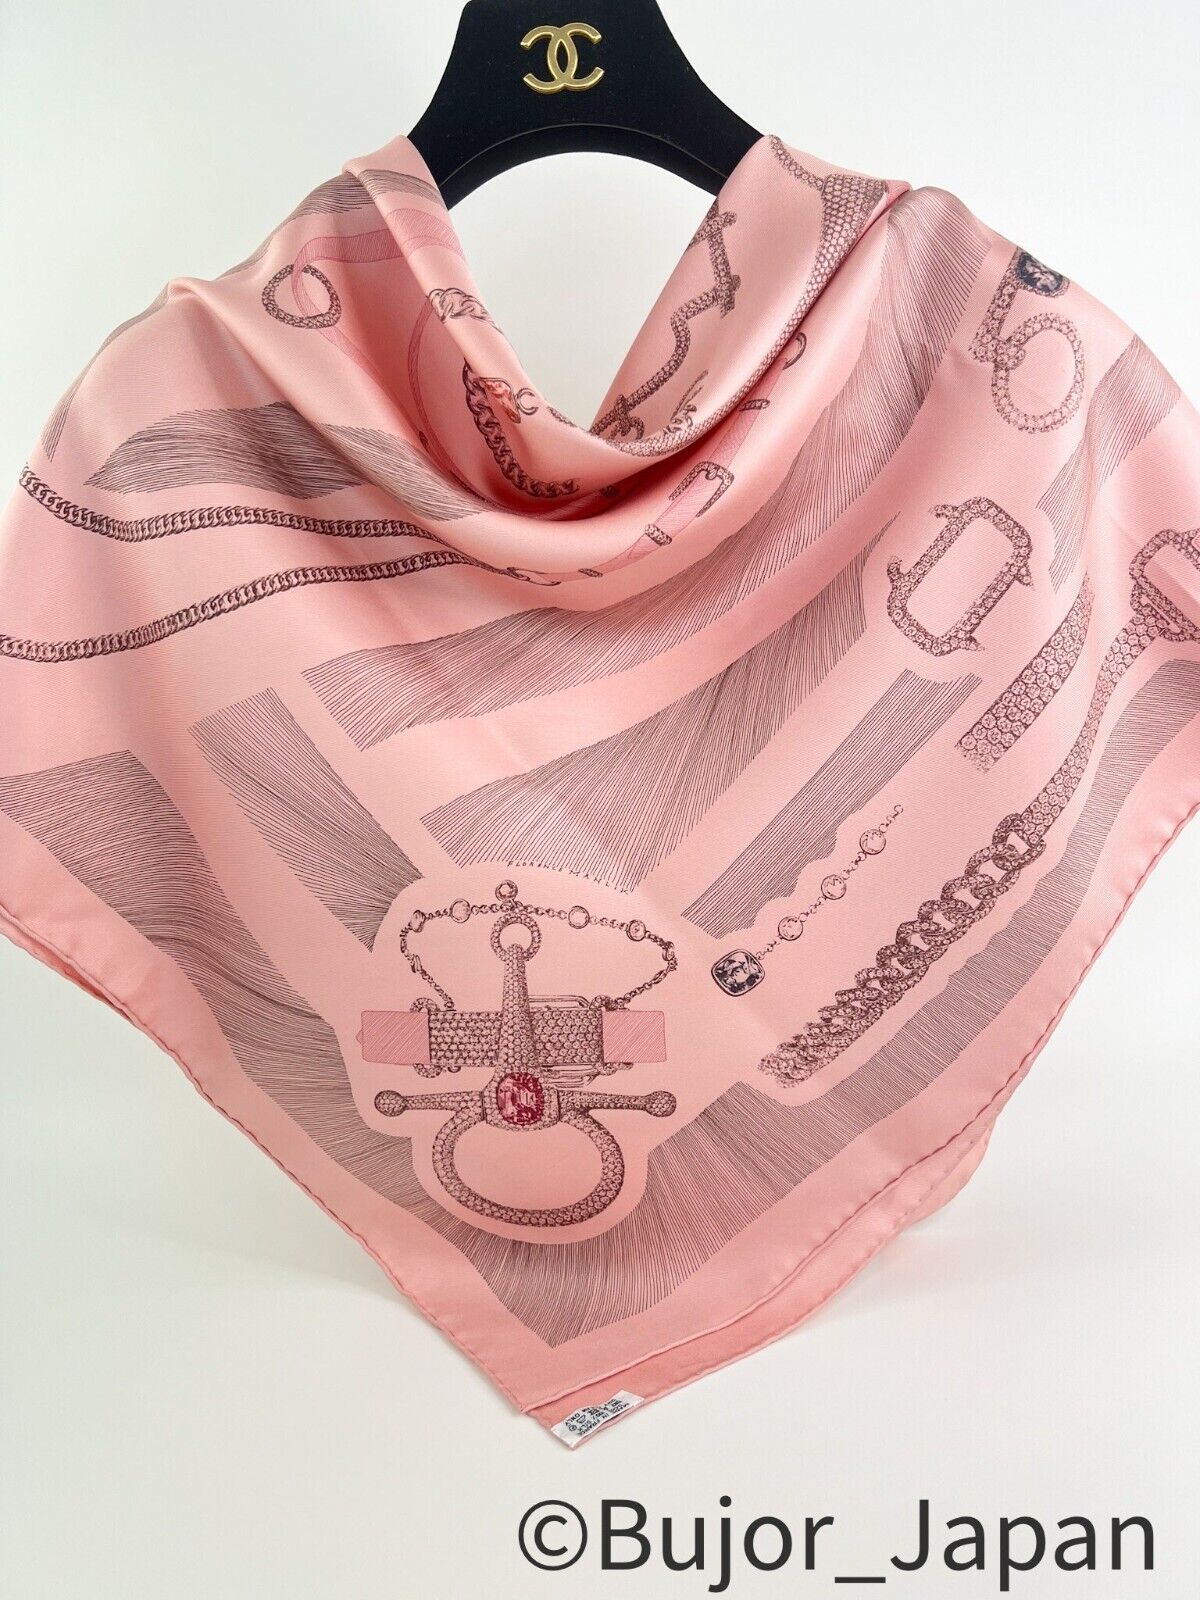 Herme scarf, Hermes Scarf "Etude pour une Parure de Gala" Vintage silk scarf, 90 cm Silk pink Carre jewelery 35" Gift for her, Head Scarf